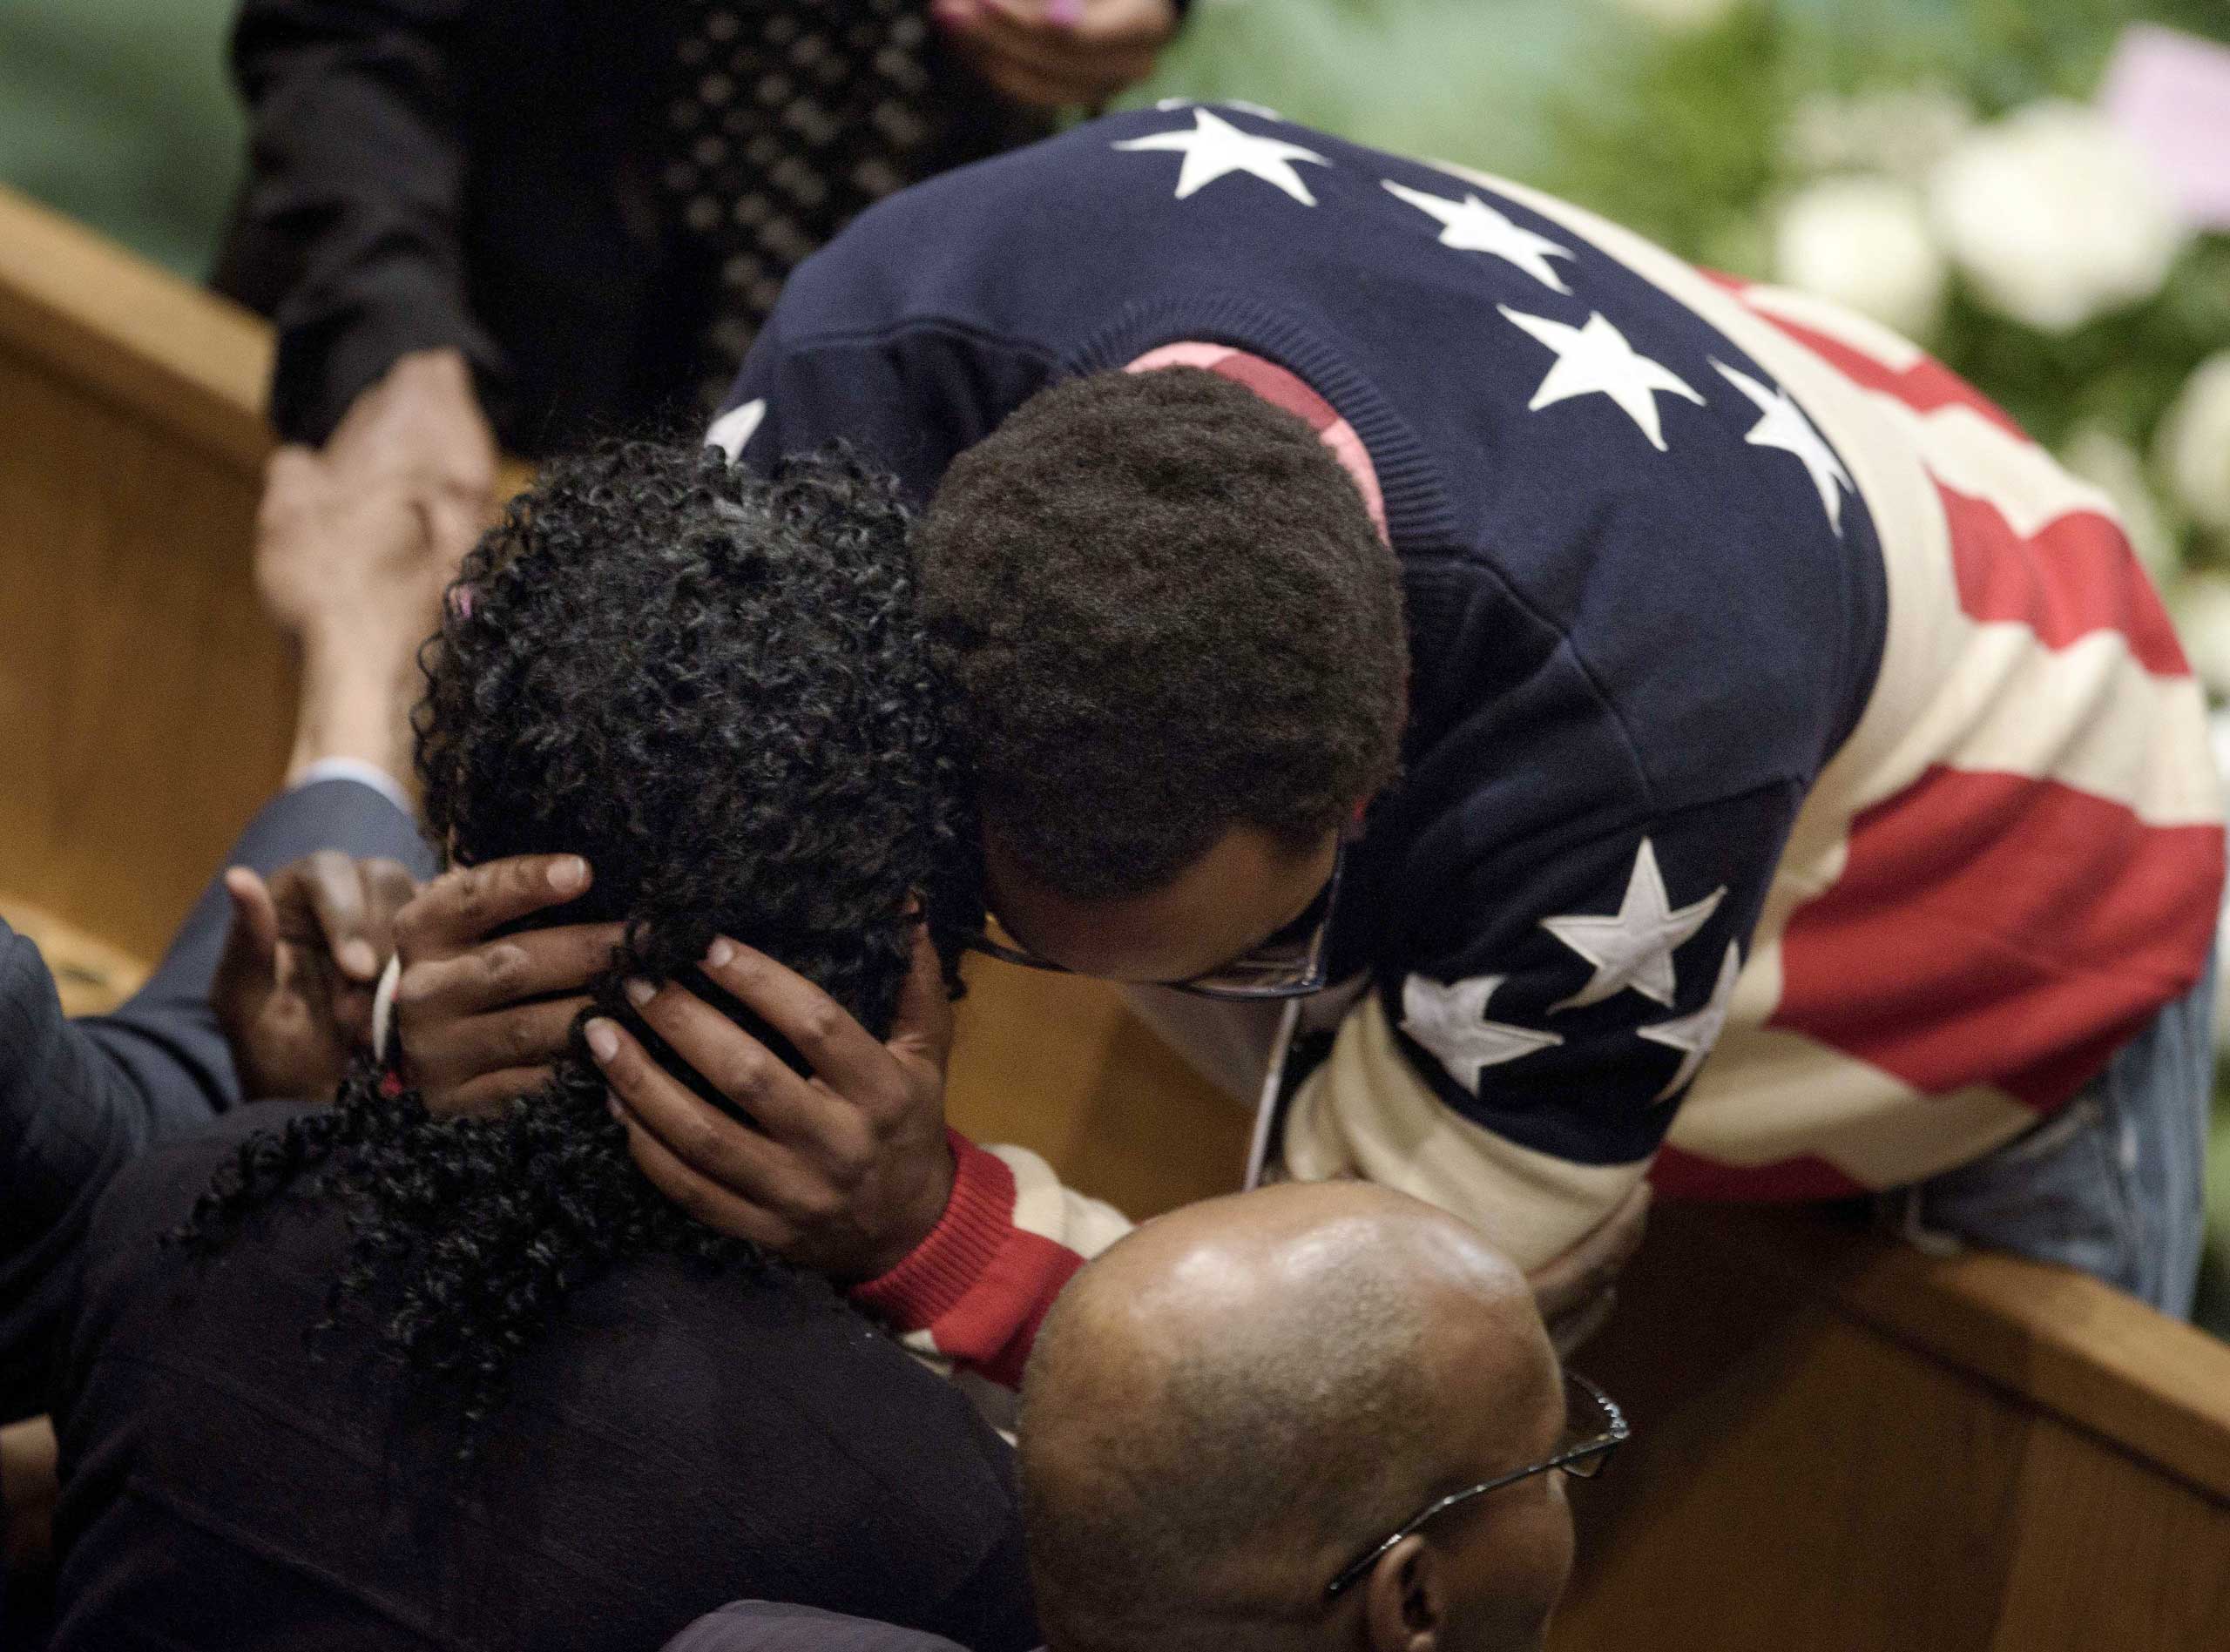 Gloria Darden, mother of Freddie Gray, is embraced before her son's funeral at New Shiloh Baptist Church in Baltimore on April 27, 2015.